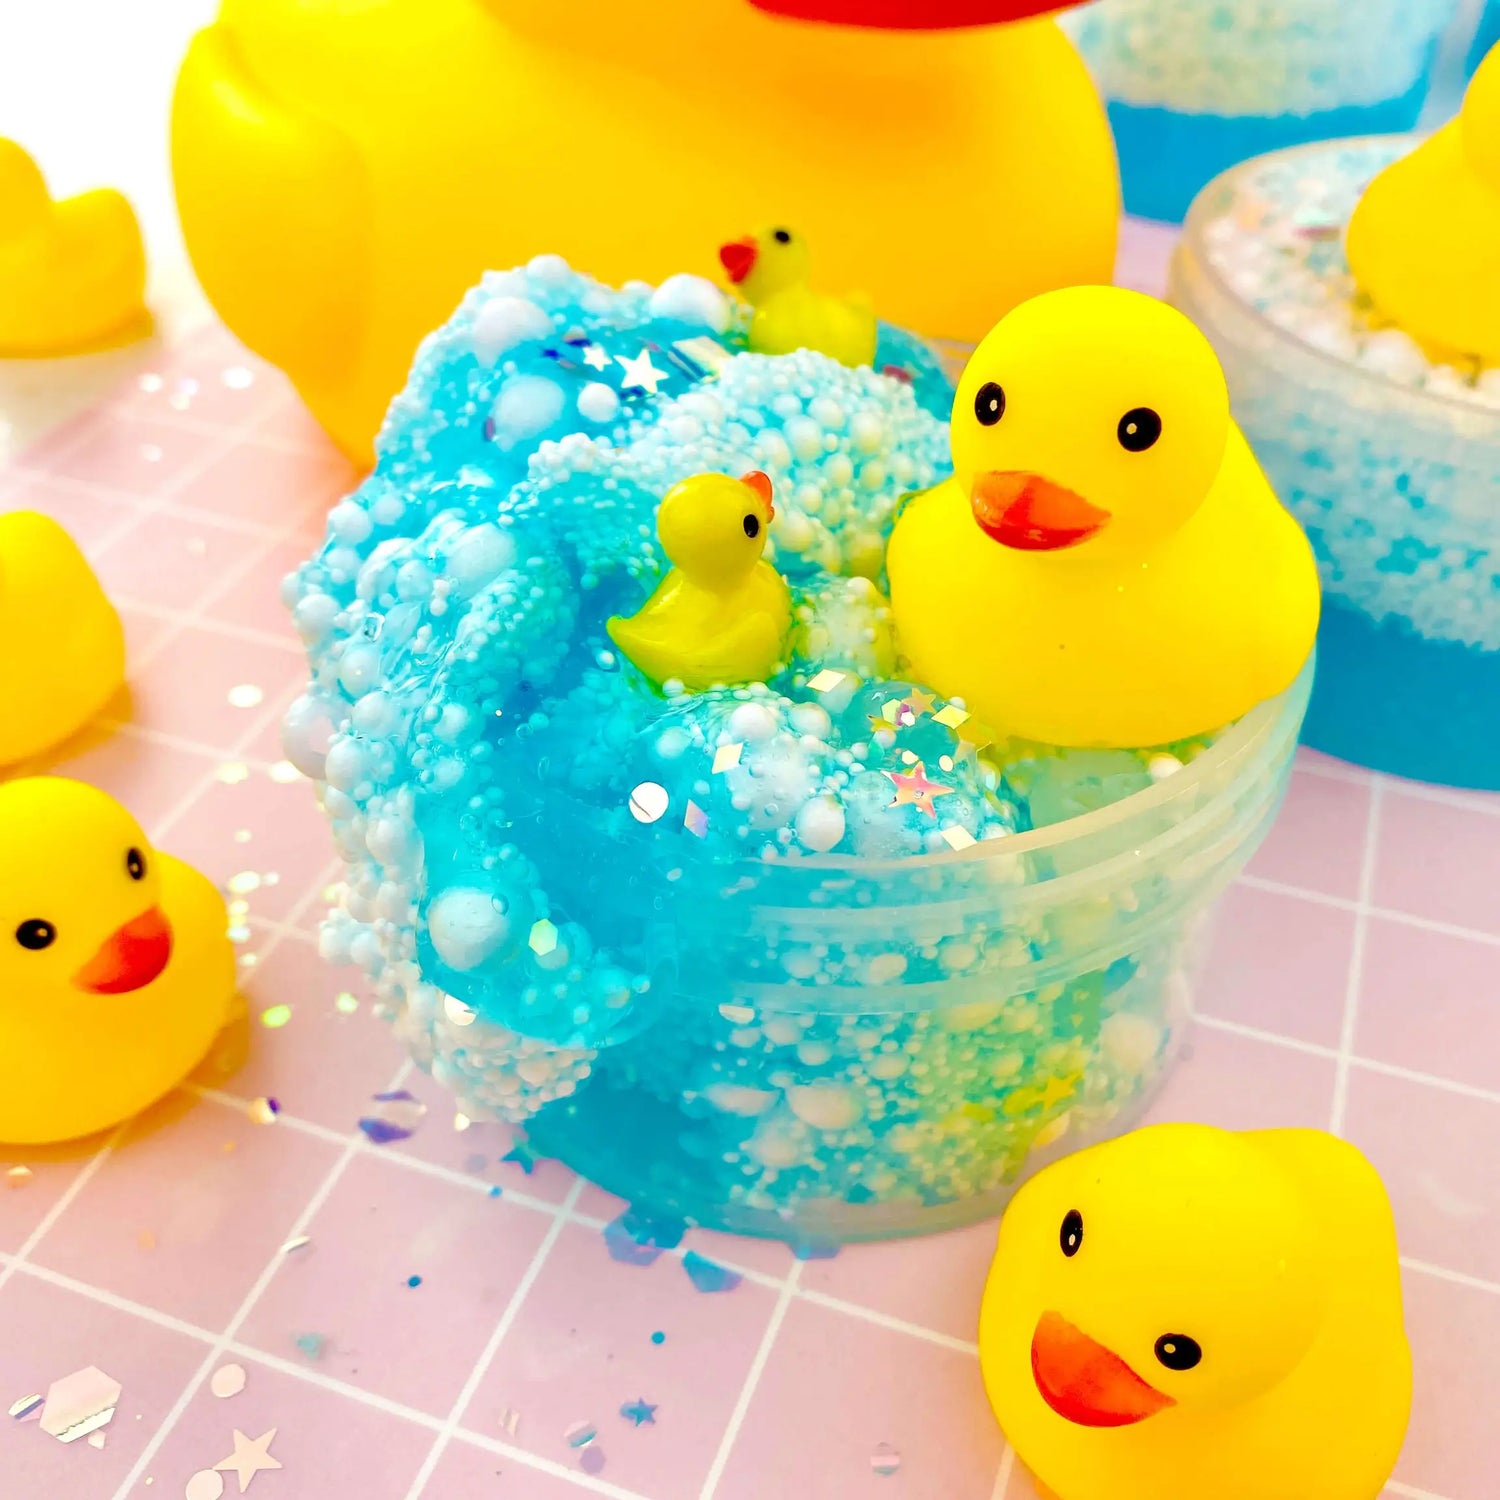 SQUEAKY CLEAN BUBBLE BATH SLIME - THE TOY STORE